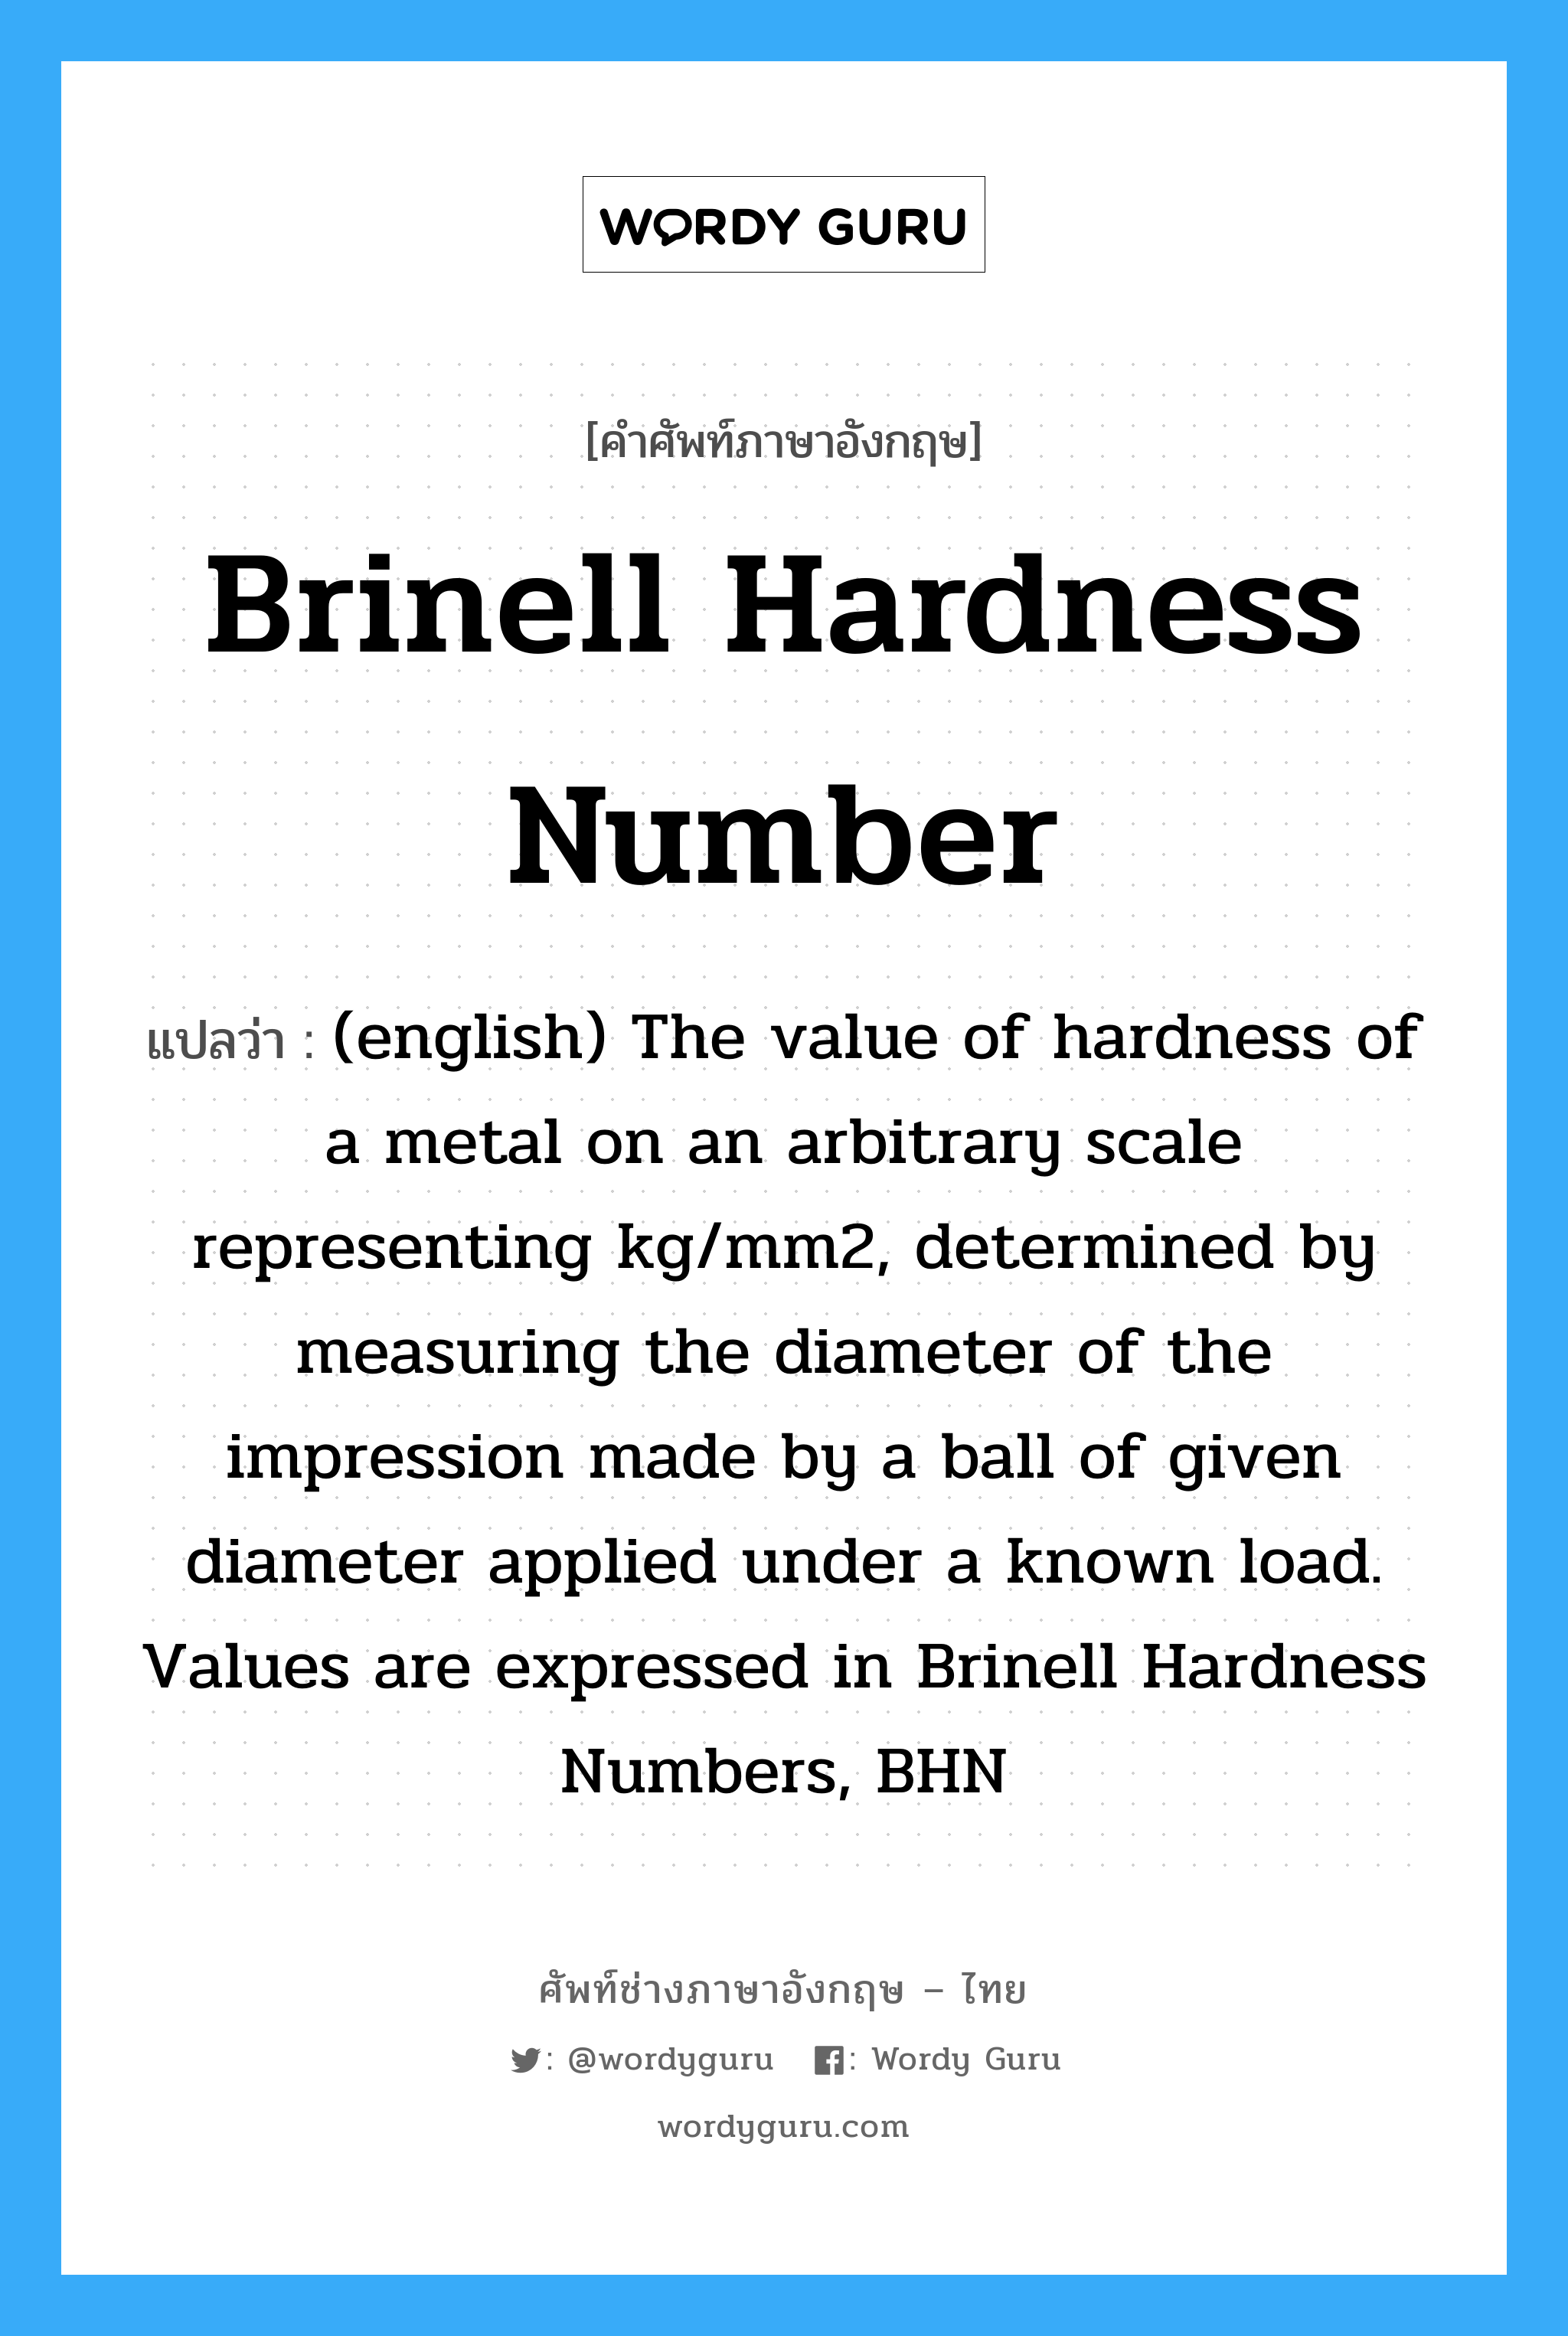 (english) The value of hardness of a metal on an arbitrary scale representing kg/mm2, determined by measuring the diameter of the impression made by a ball of given diameter applied under a known load. Values are expressed in Brinell Hardness Numbers, BHN ภาษาอังกฤษ?, คำศัพท์ช่างภาษาอังกฤษ - ไทย (english) The value of hardness of a metal on an arbitrary scale representing kg/mm2, determined by measuring the diameter of the impression made by a ball of given diameter applied under a known load. Values are expressed in Brinell Hardness Numbers, BHN คำศัพท์ภาษาอังกฤษ (english) The value of hardness of a metal on an arbitrary scale representing kg/mm2, determined by measuring the diameter of the impression made by a ball of given diameter applied under a known load. Values are expressed in Brinell Hardness Numbers, BHN แปลว่า Brinell Hardness Number